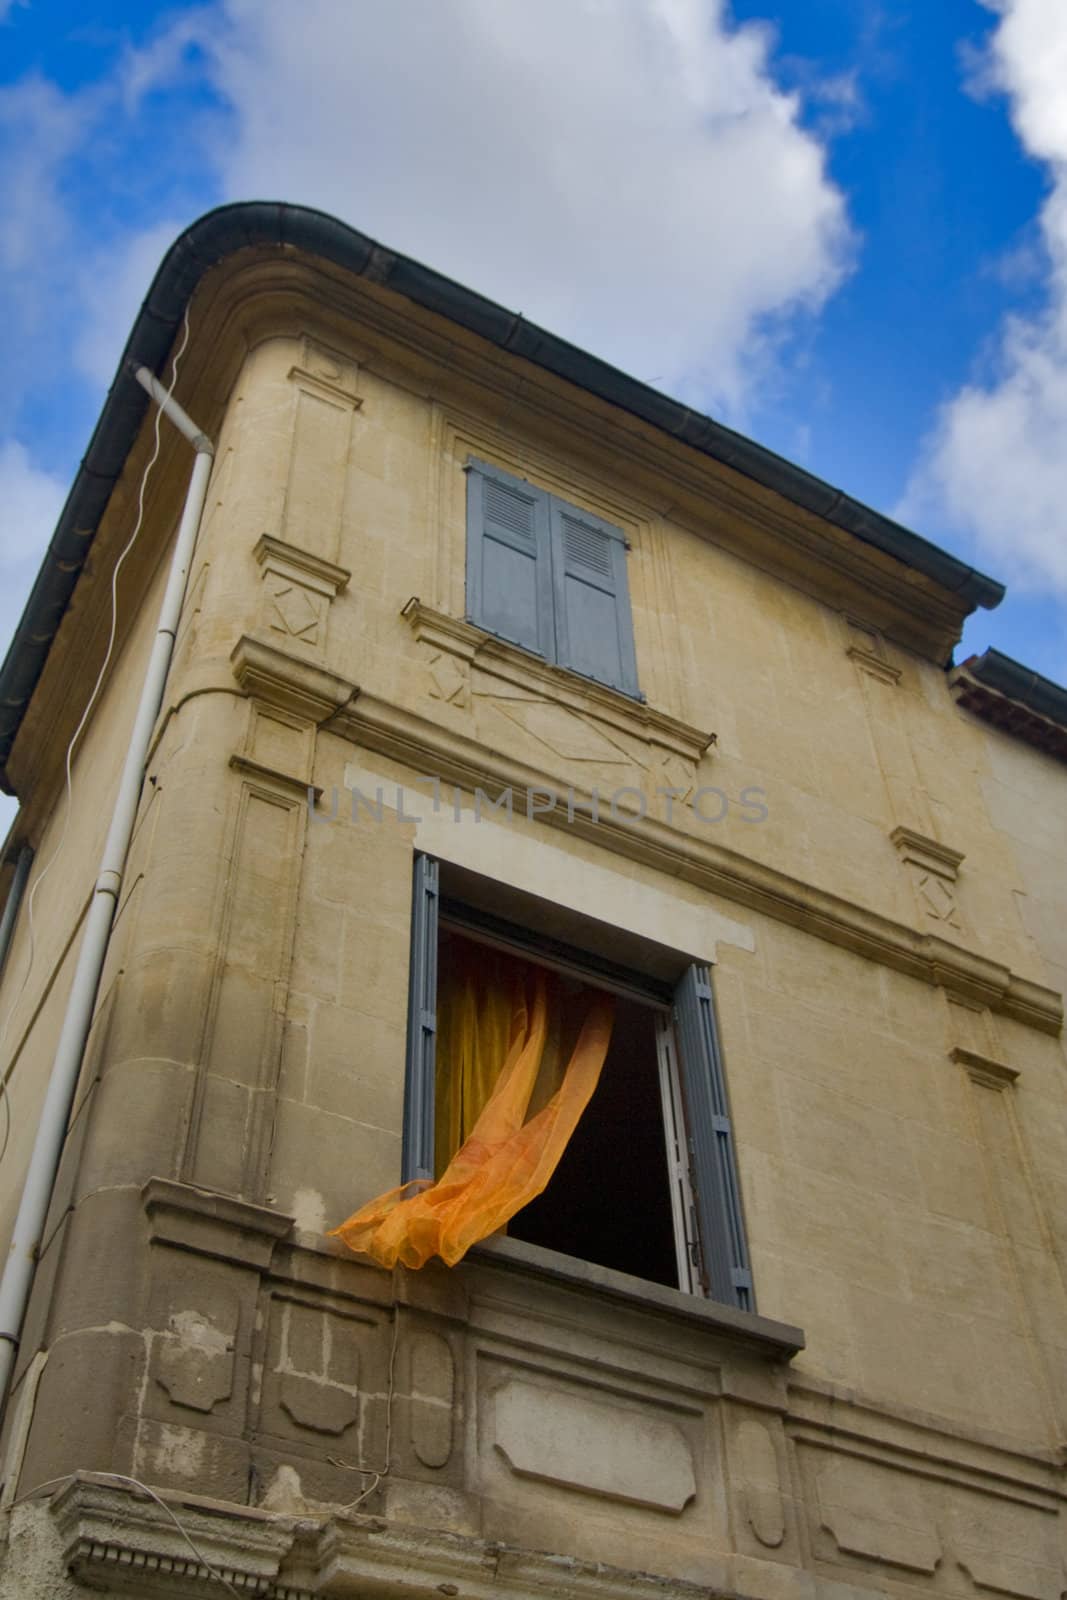 Open window with orange valance  in stone house